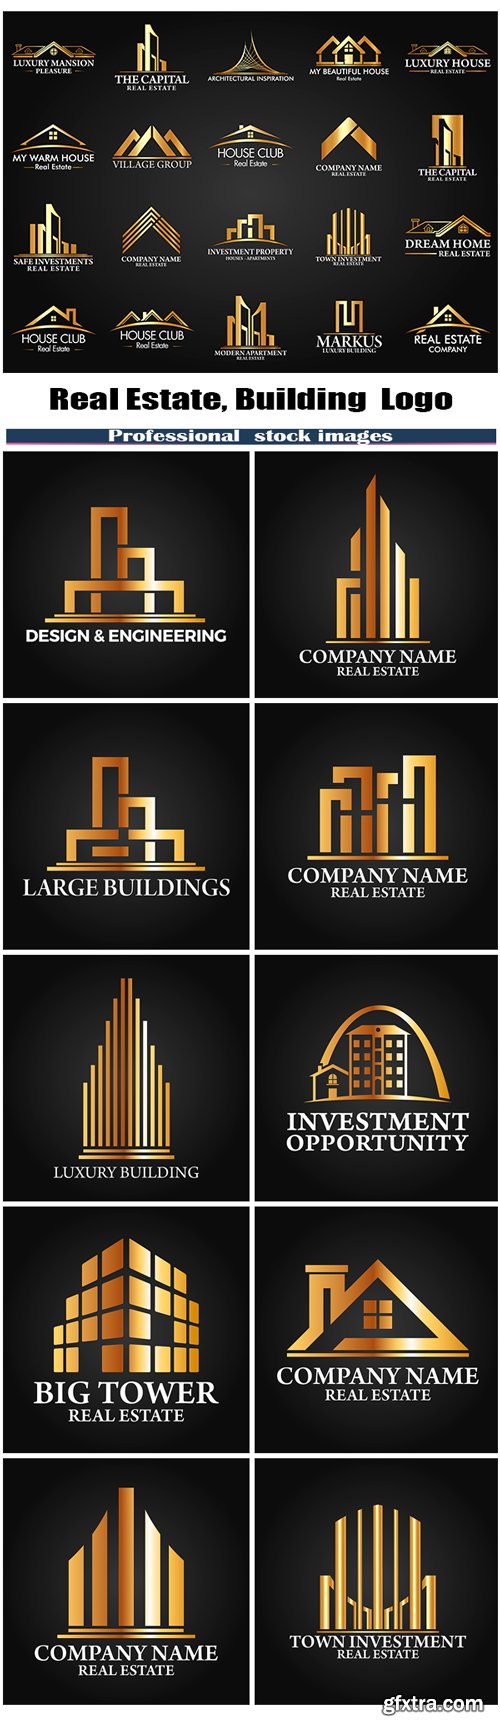 Real Estate, Building and Investment Logo #2